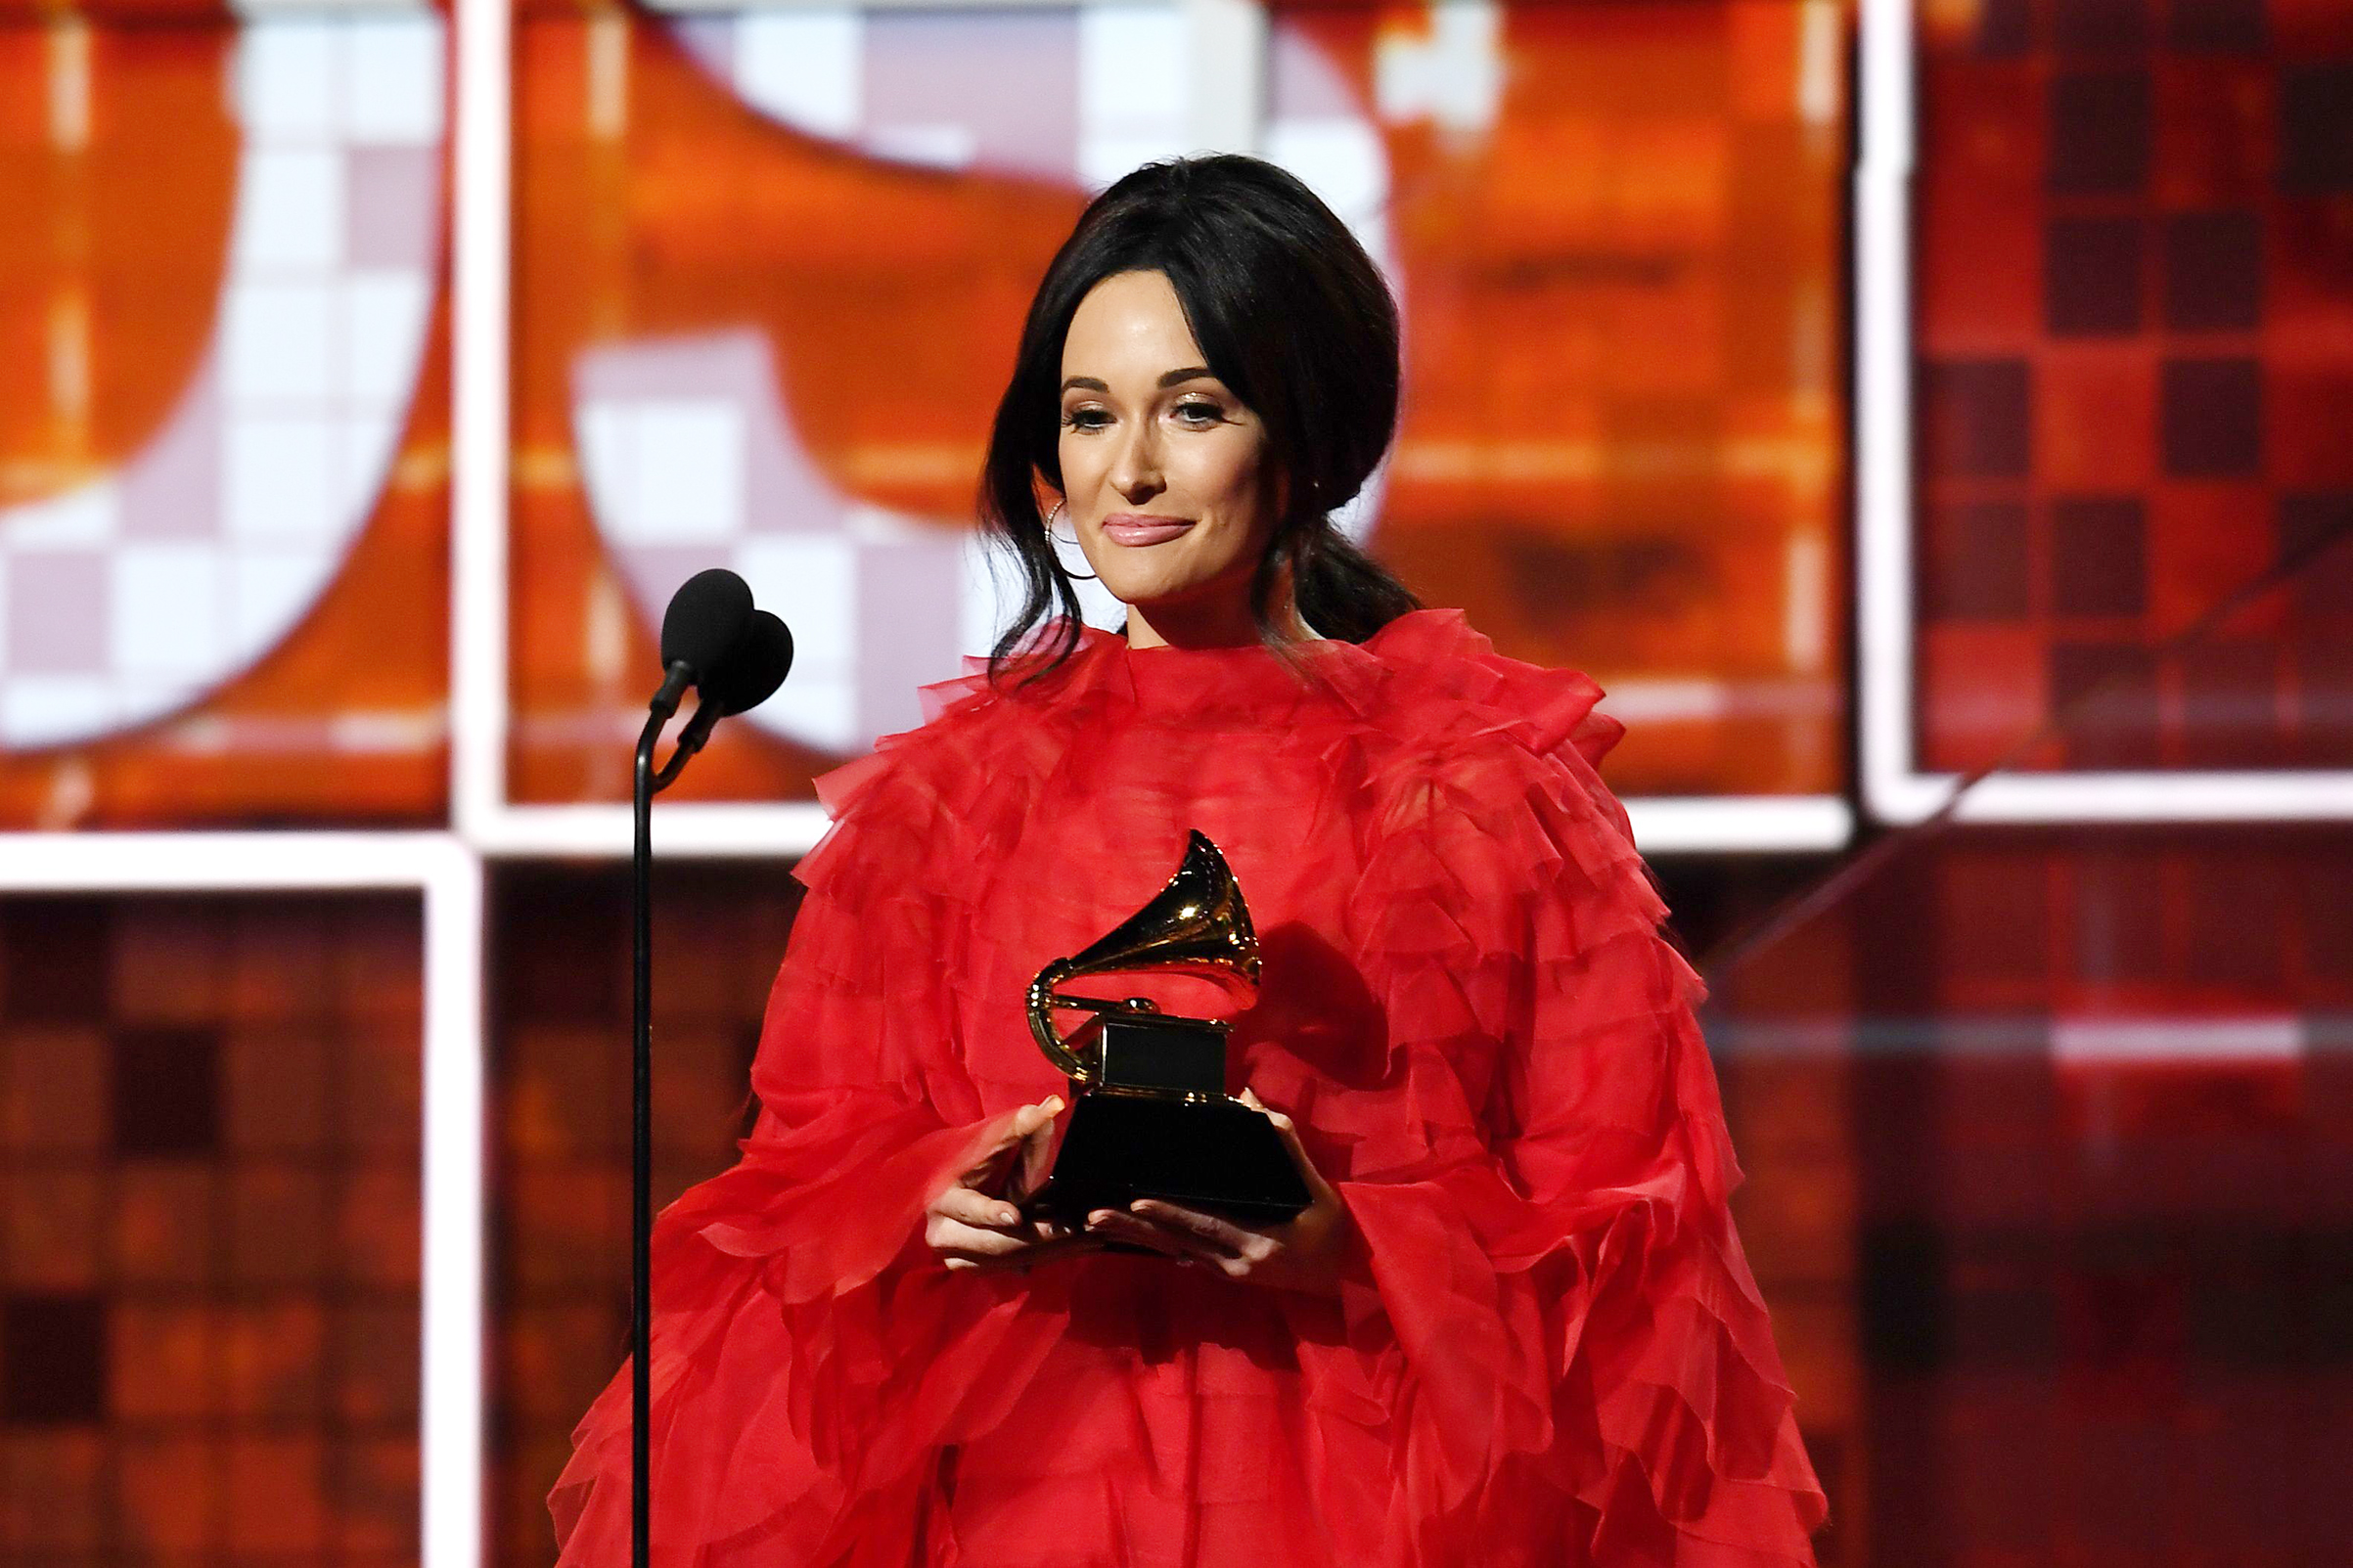 Kacey Musgraves accepts the award for Best Country Album with 